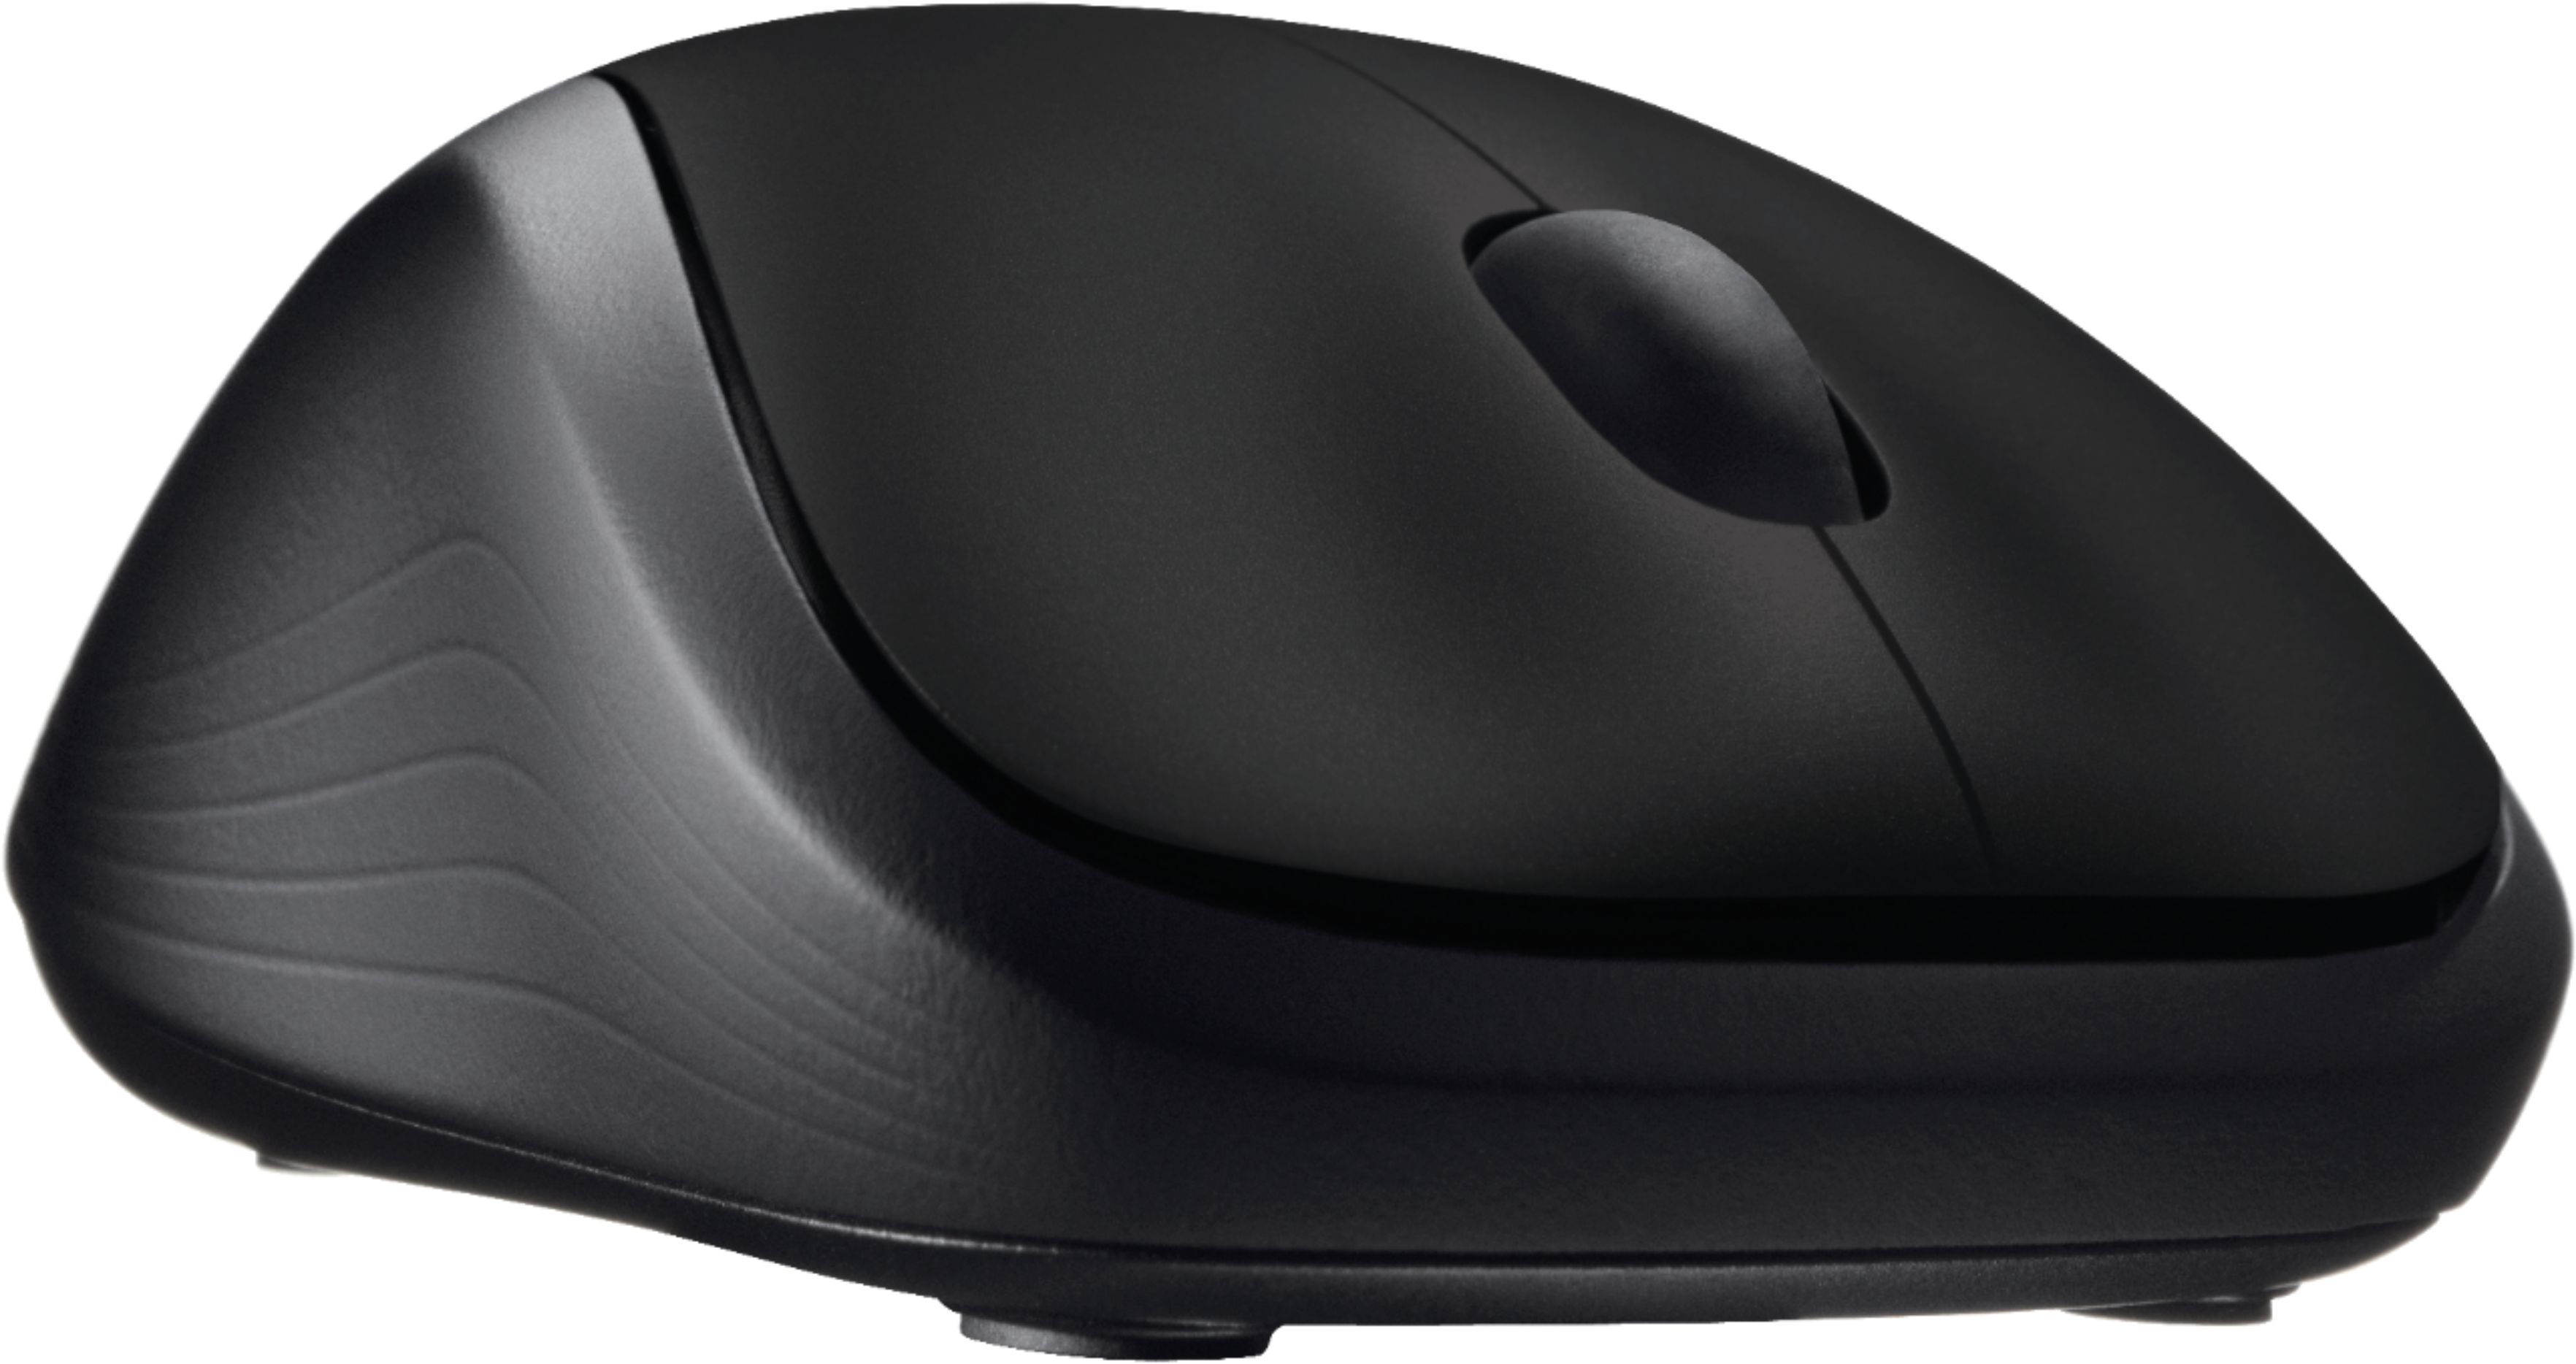 Best Buy: Logitech M125 USB Optical Mouse with Retractable Cable Dark Gray  910-002247